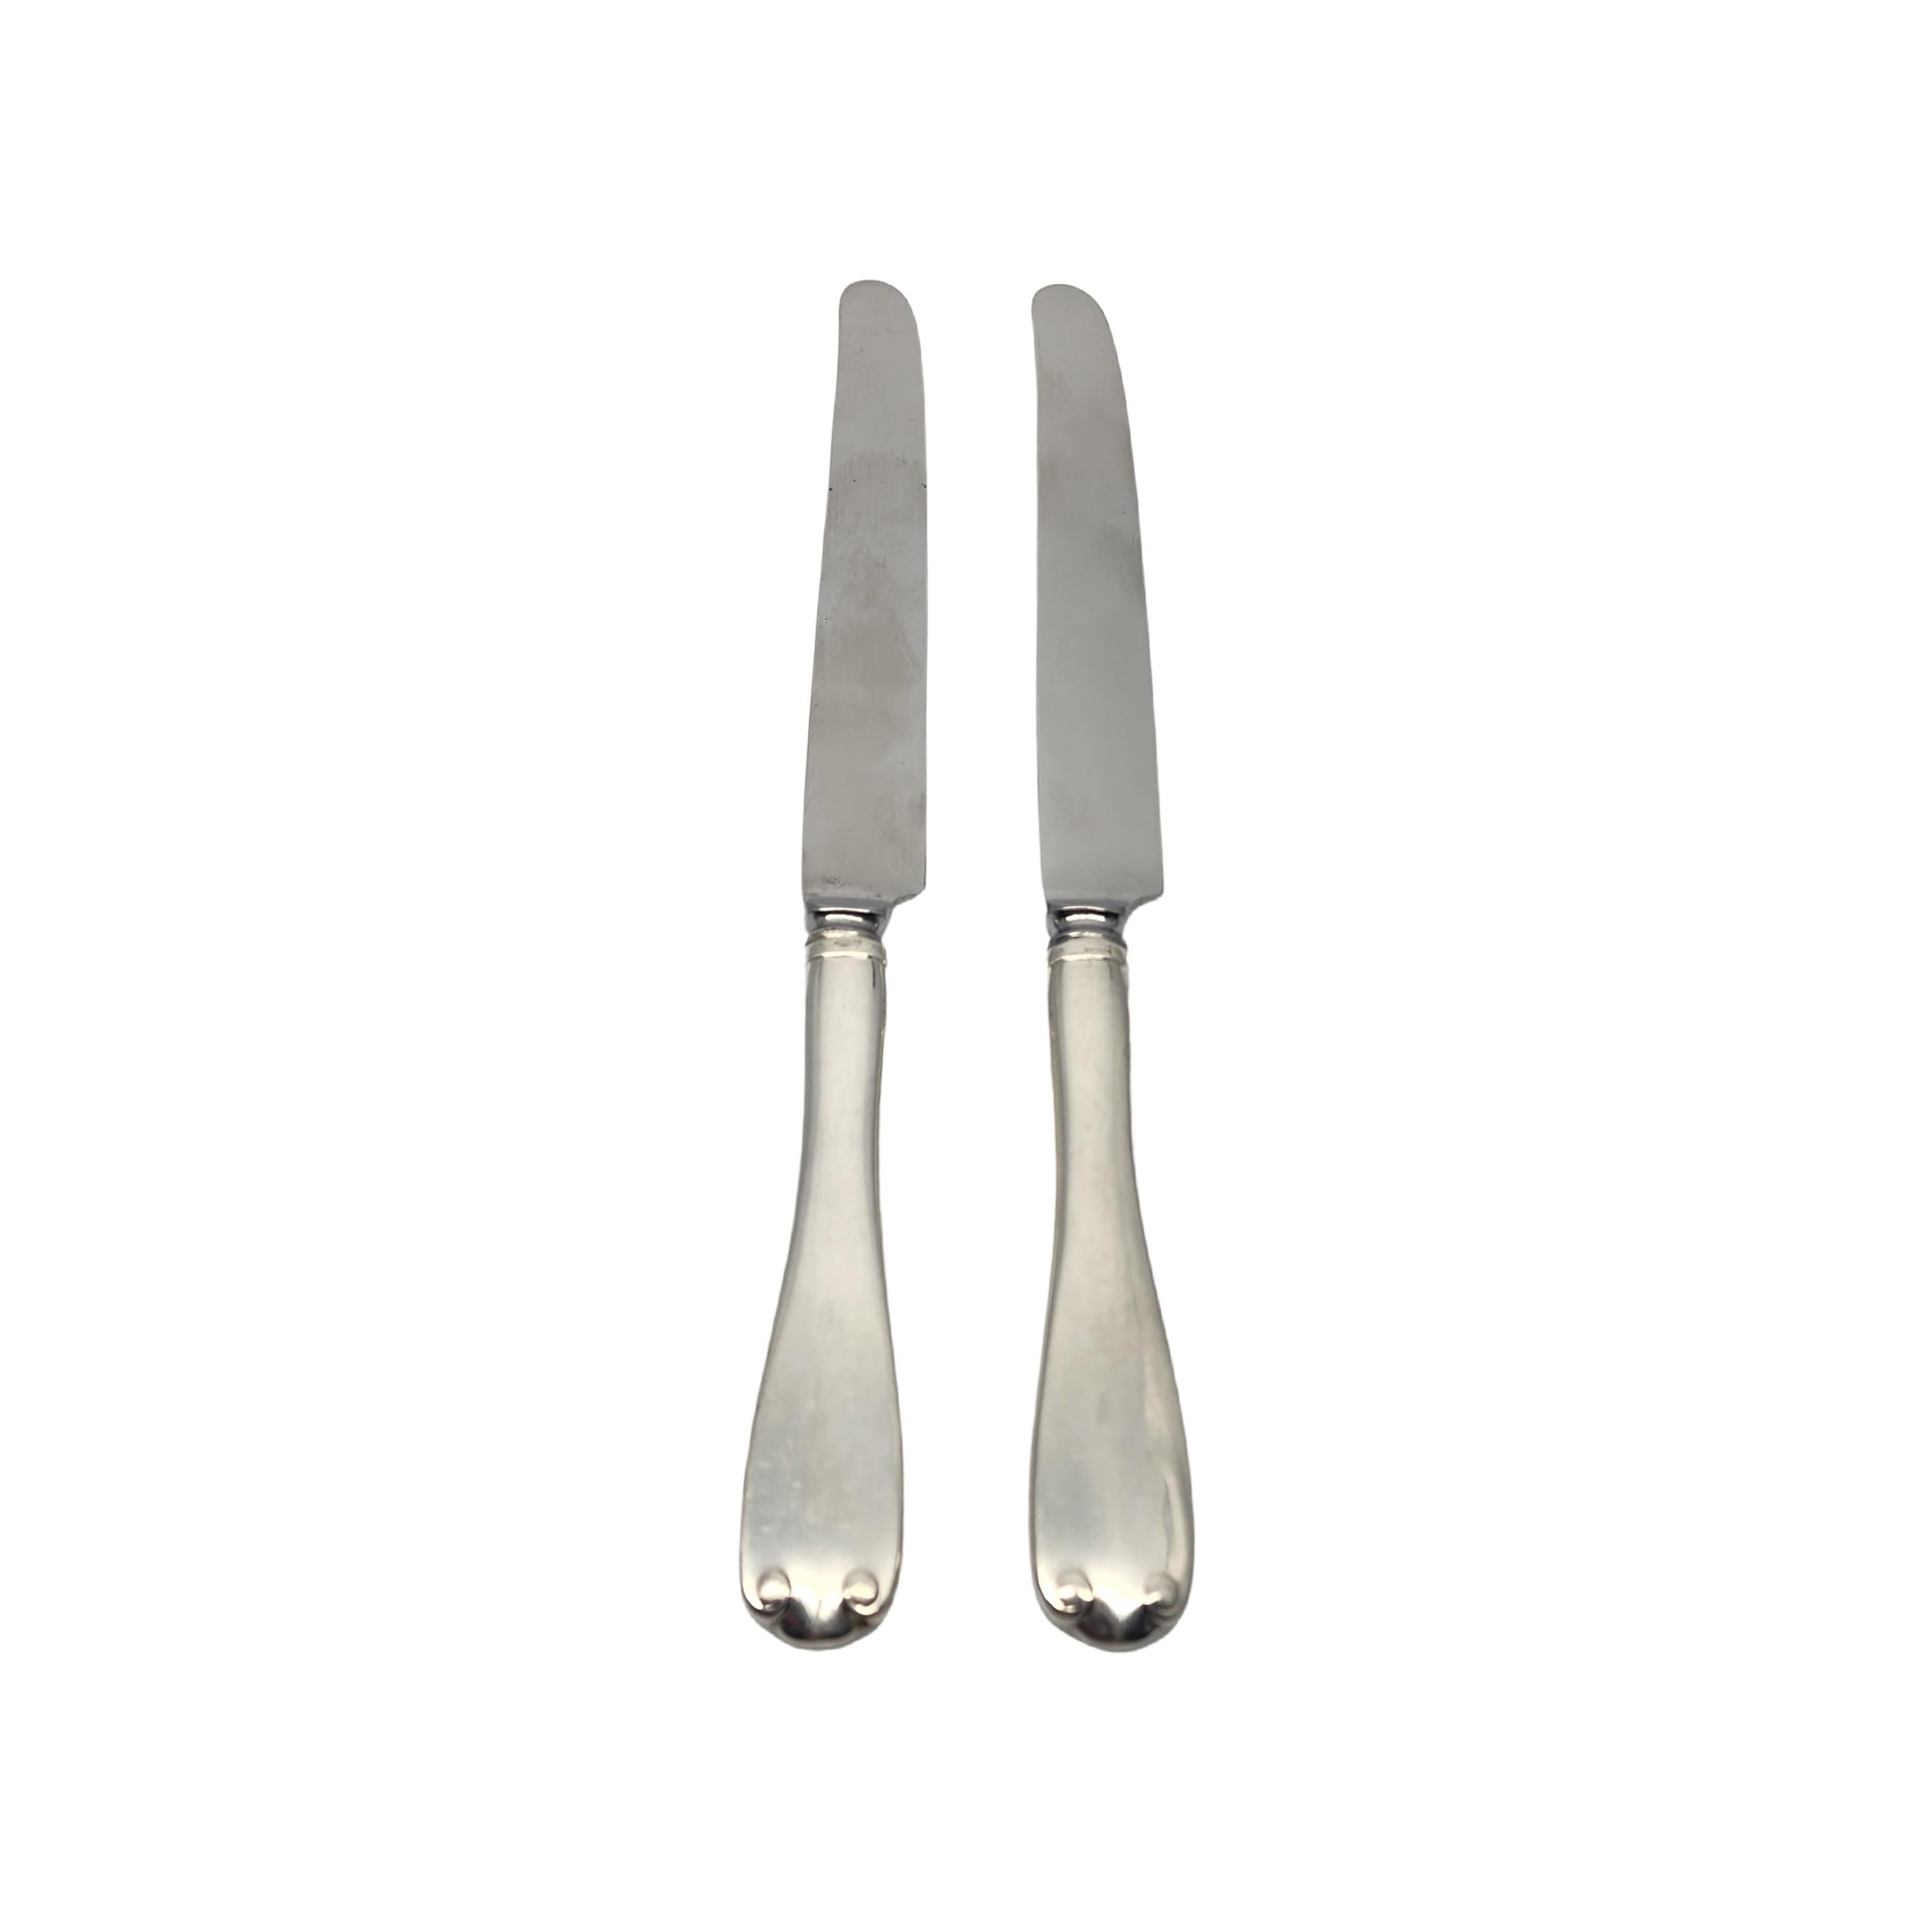 Set of 2 sterling silver handle stainless blade knives by Tiffany & Co in the Flemish pattern.

No monogram.

The Flemish pattern features a simple and elegant scroll design, making it a timeless classic that is still in demand today. Does not